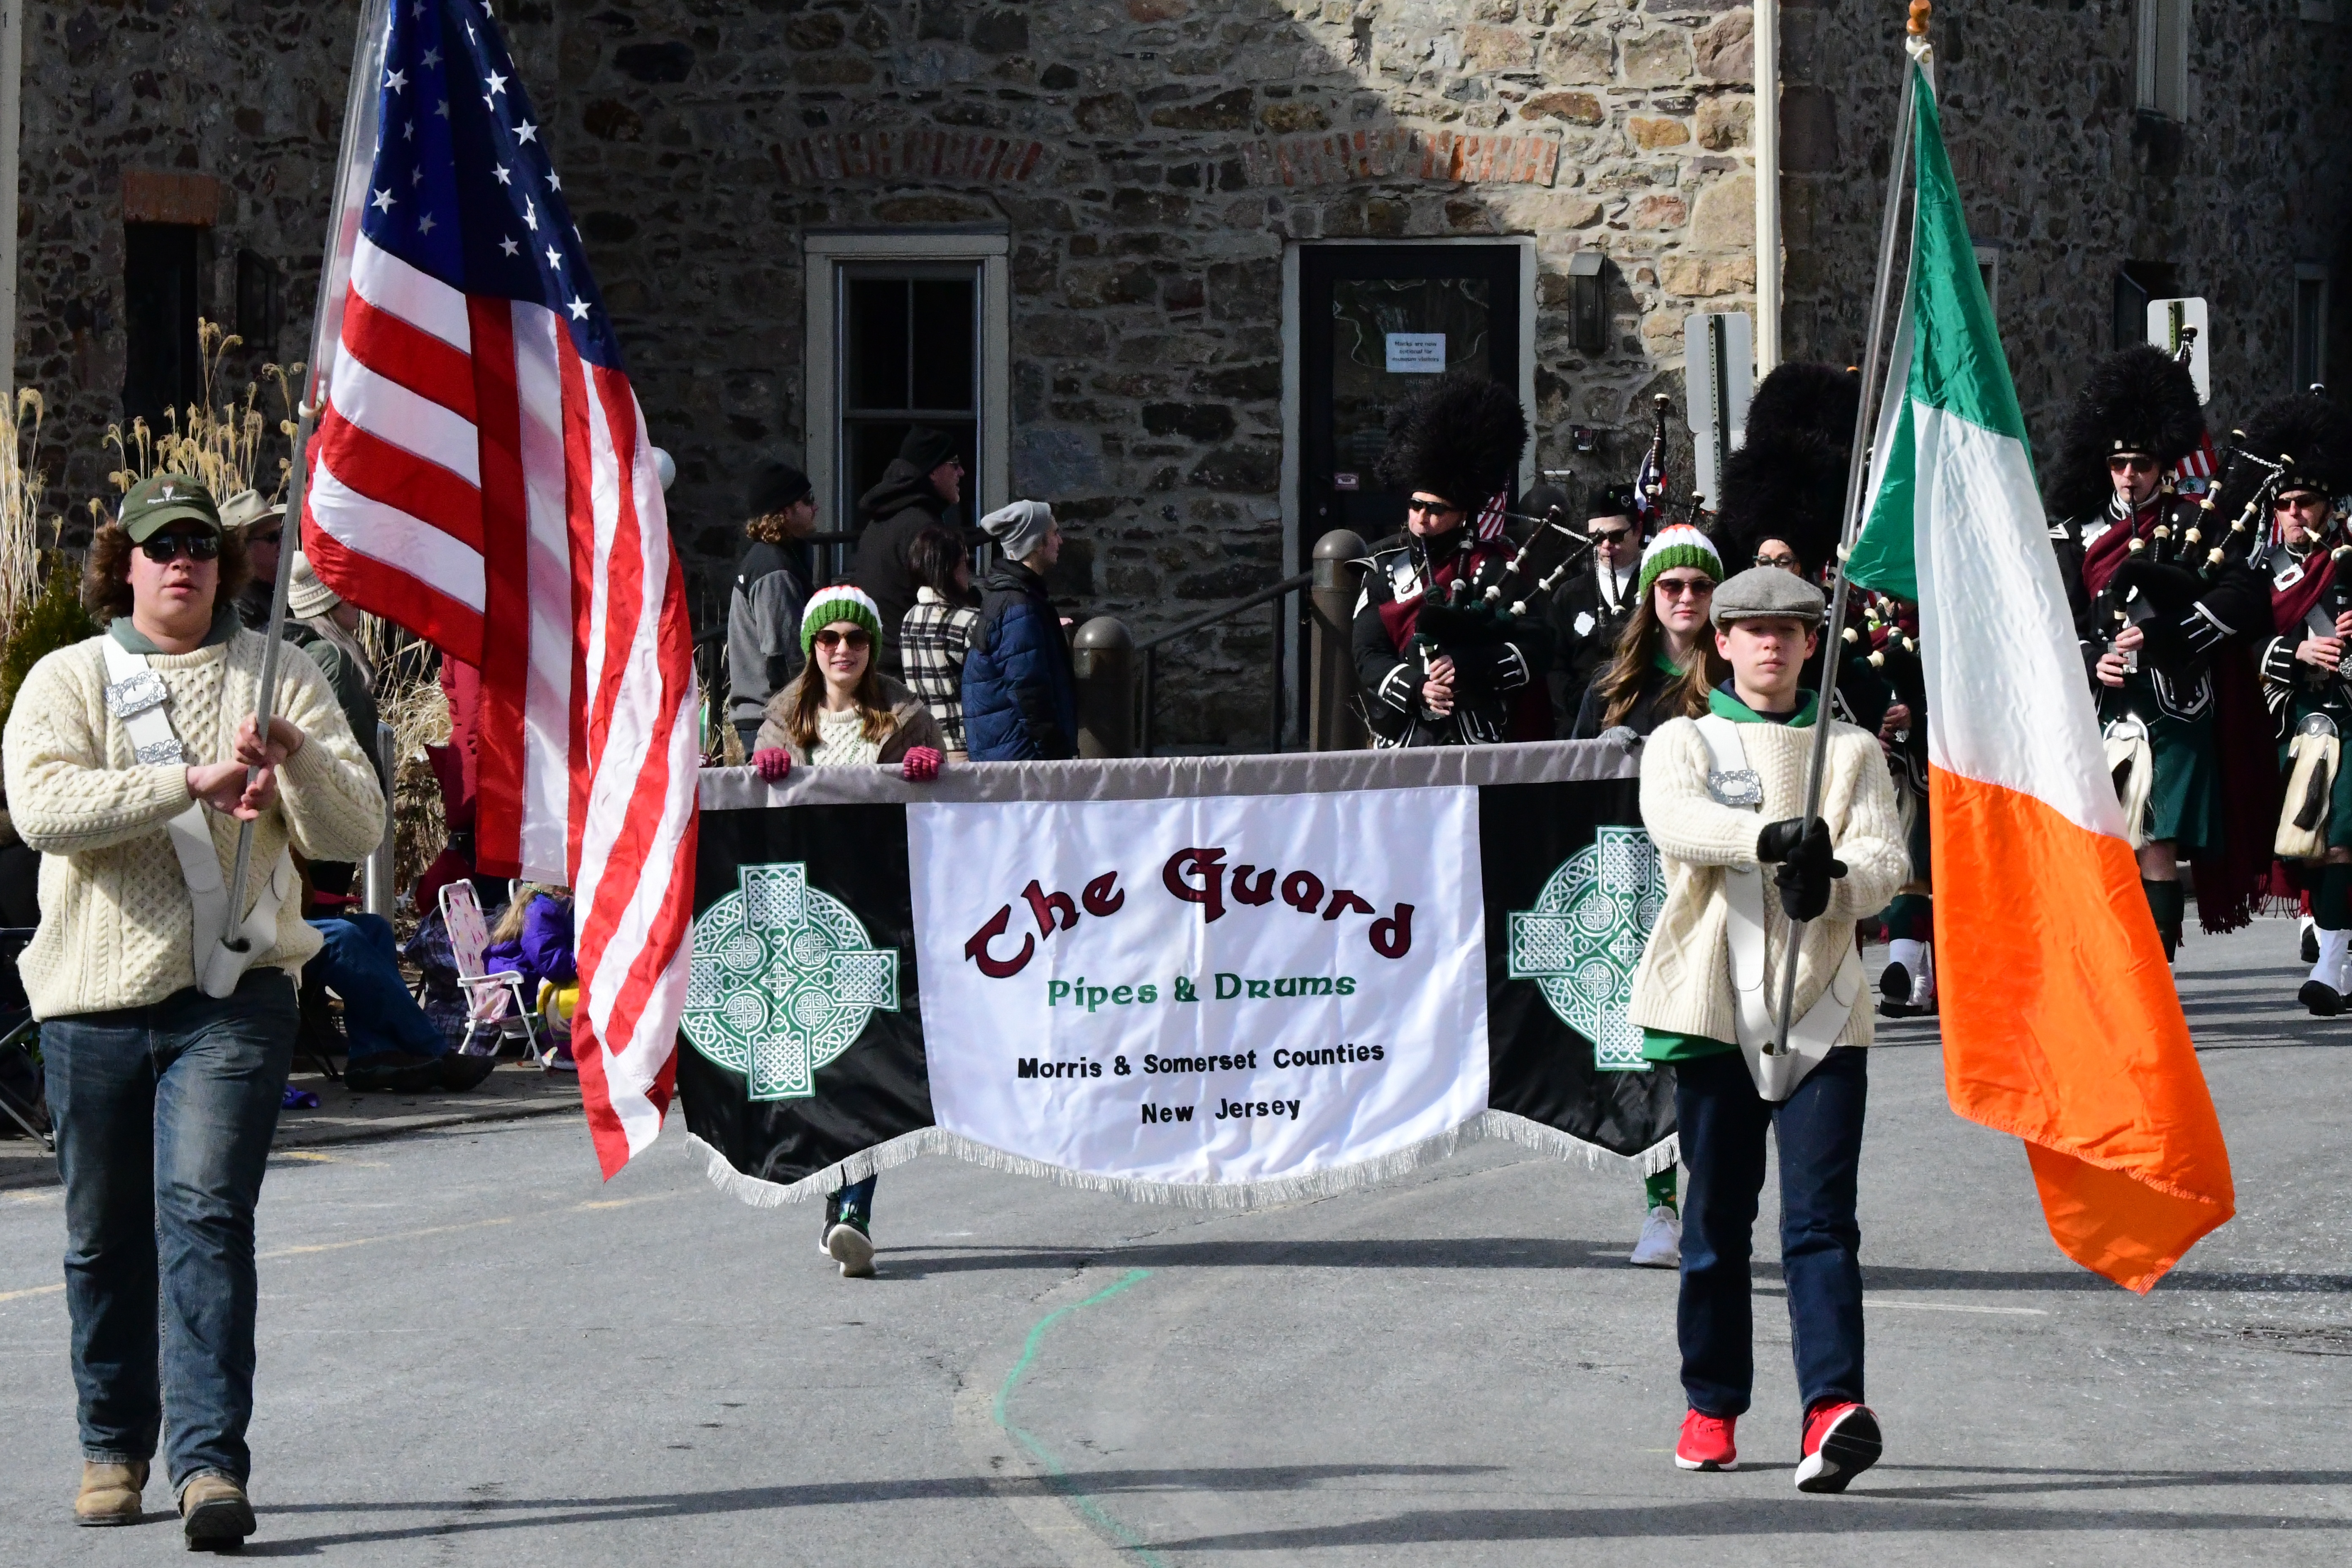 The 2022 St Patrick's Day Parade hosted by the Friendly Sons of St Patrick Hunterdon County took place in Clinton on March 13. Here, The Guard Pipes & Drums of Morris and Somerset Counties.